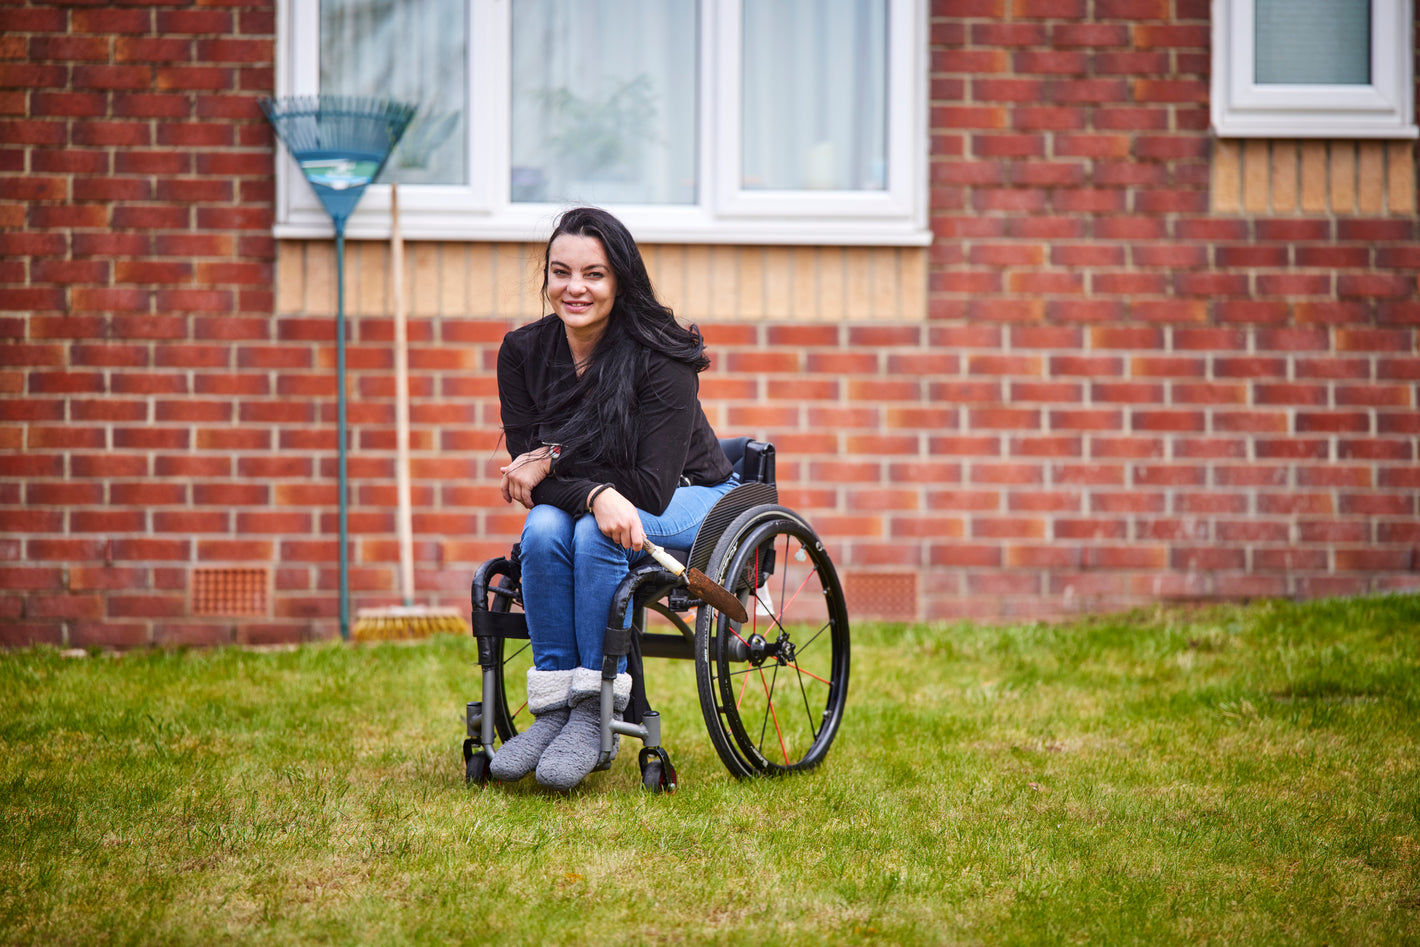 lady in a wheelchair on a lawn with a rake and brush in the background